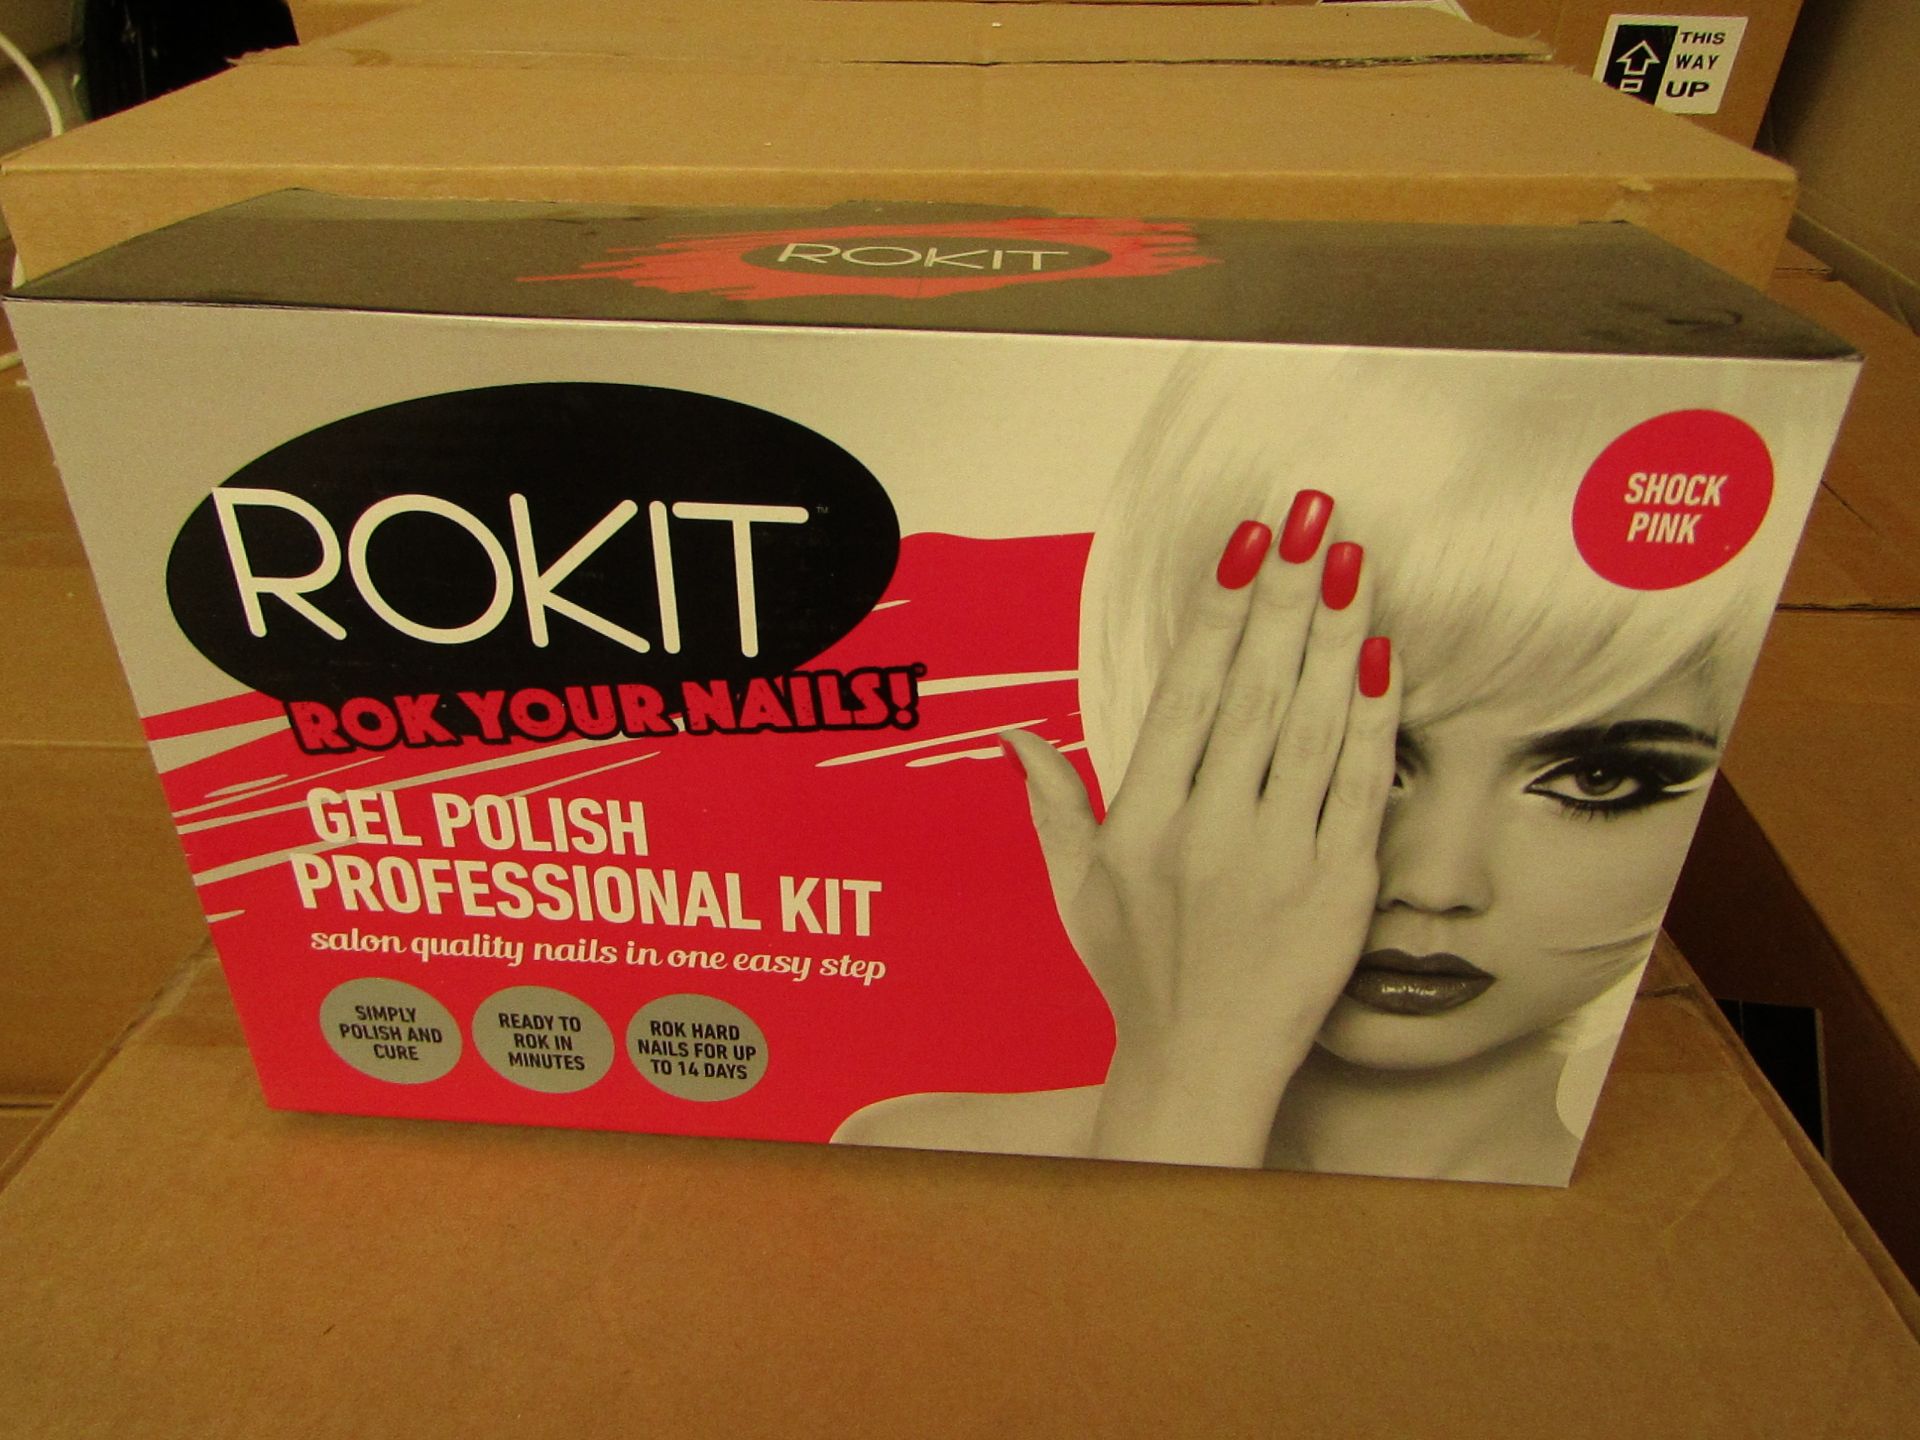 2x ROKIT - Professional Gel Polish Kit - (Please Note These Sets Are Not Complete & May Be Missing